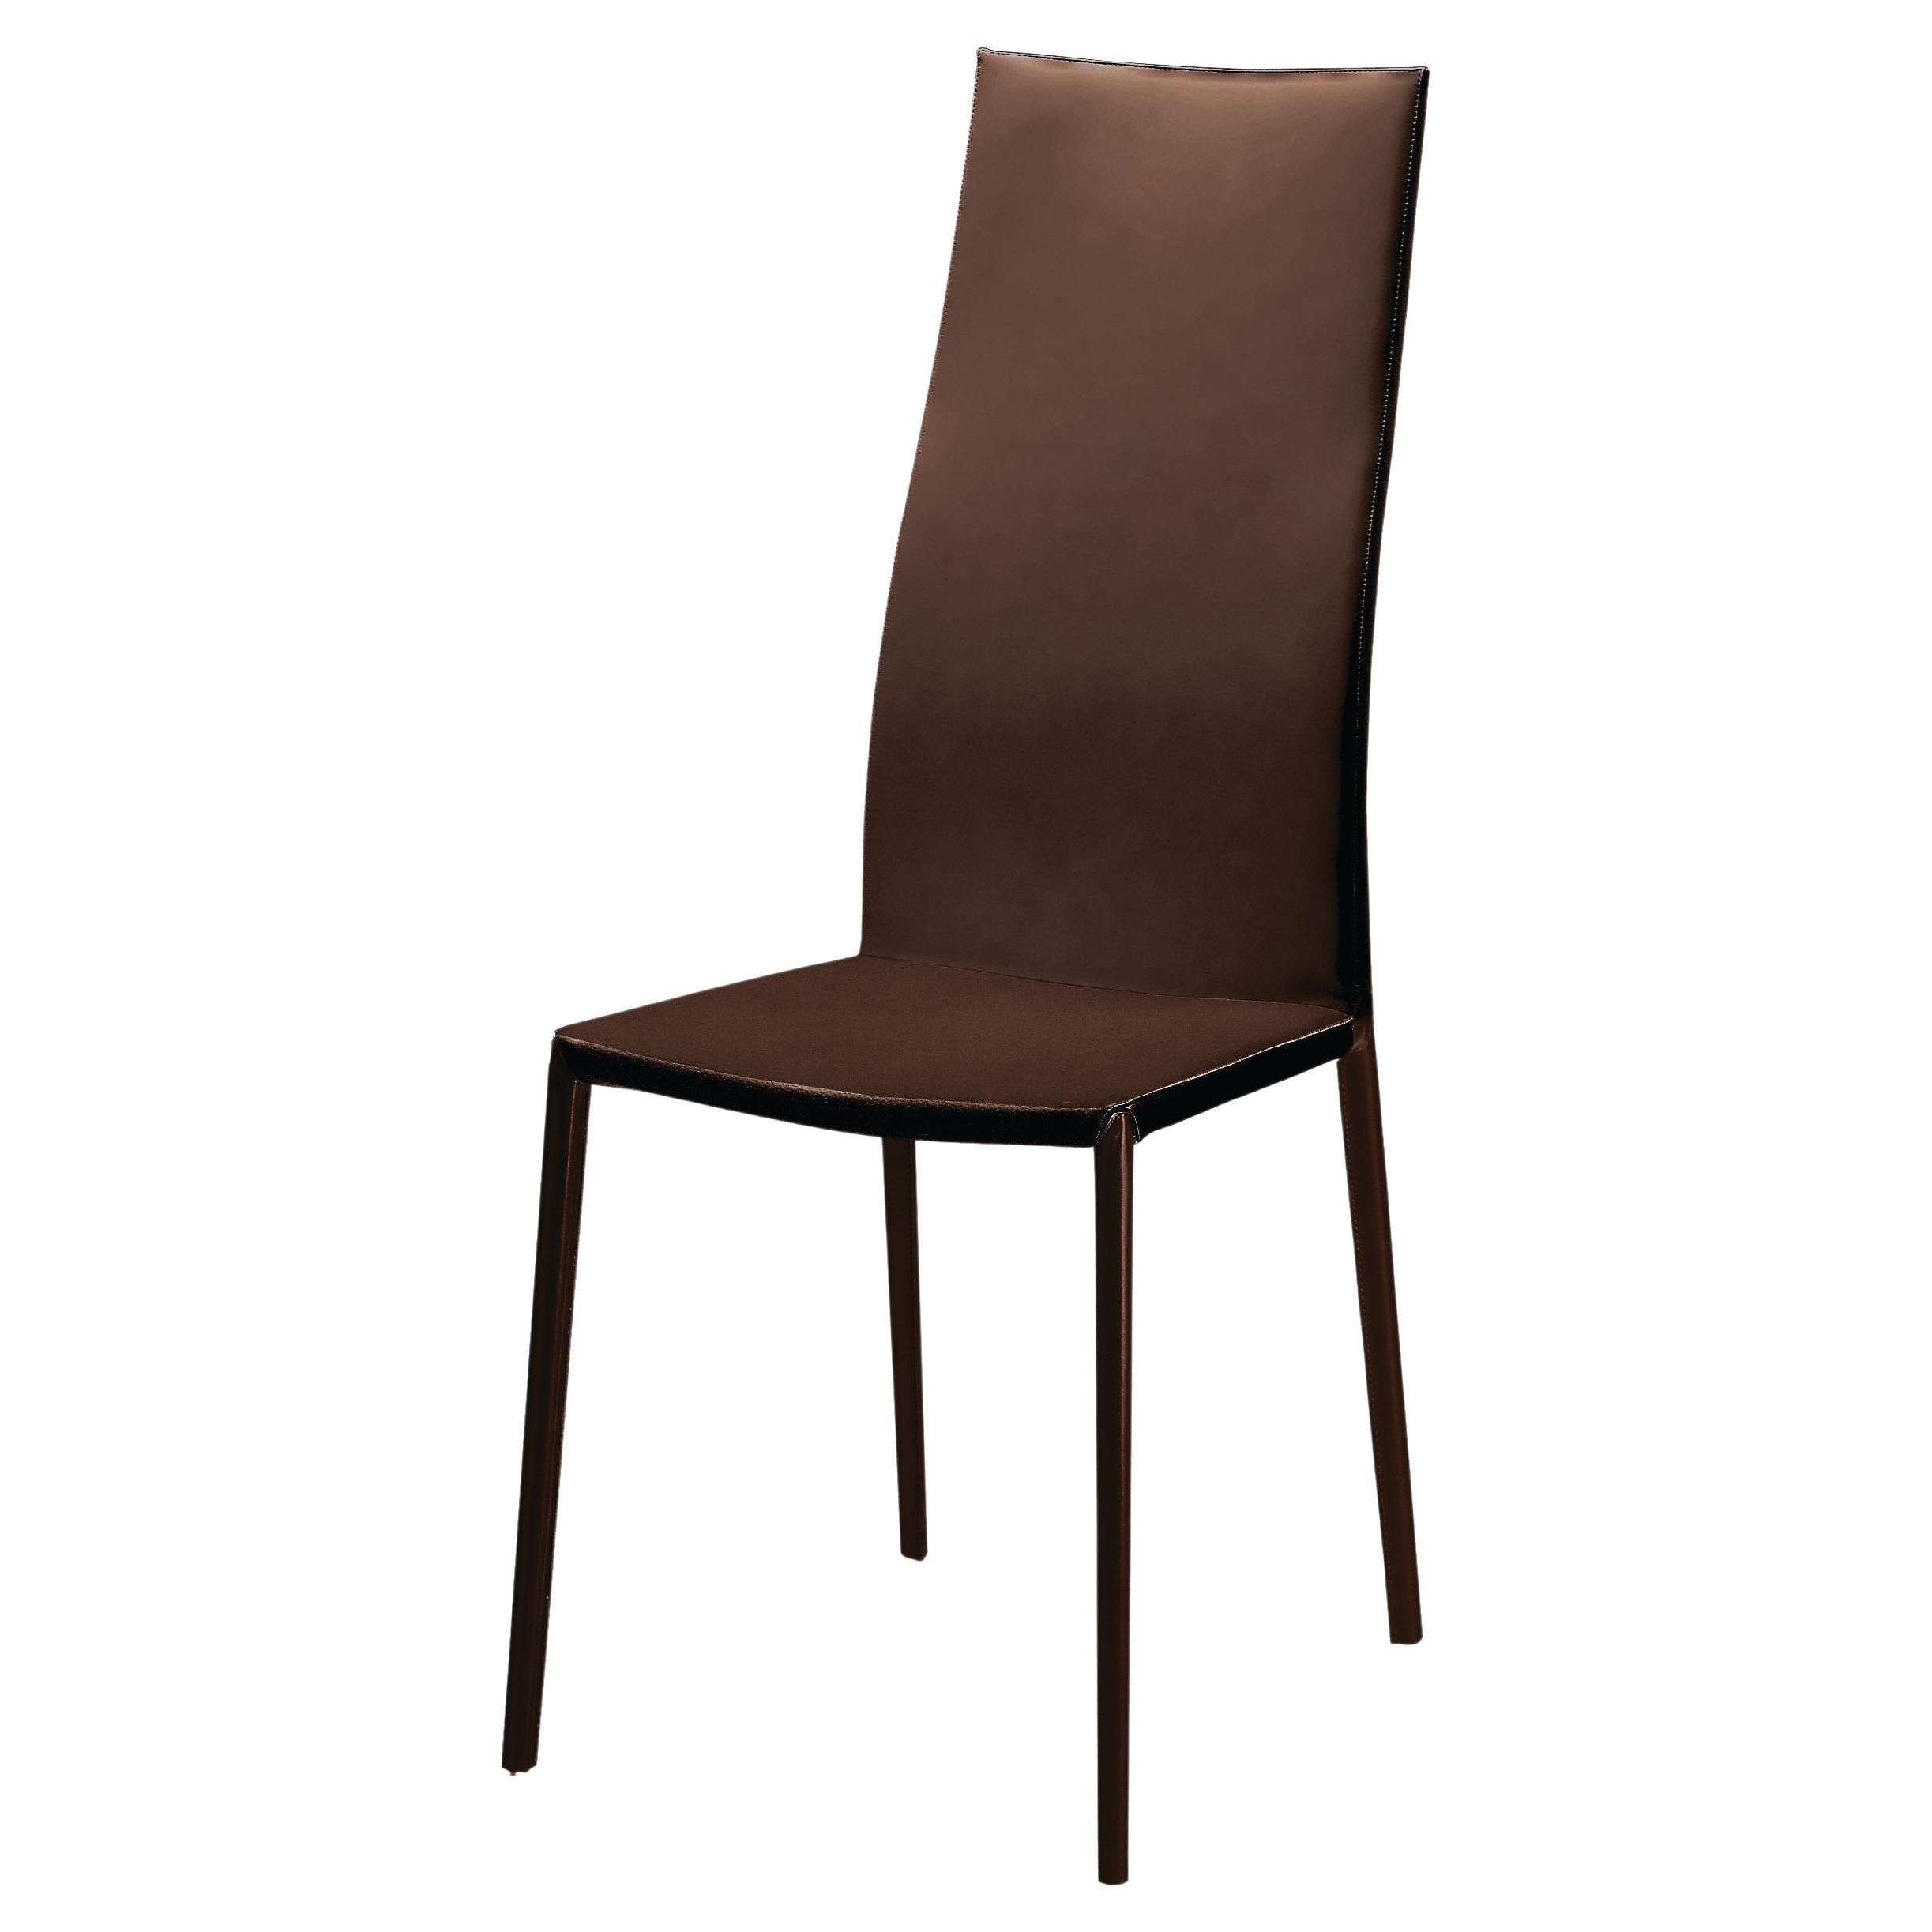 Zanotta Lealta Chair in Brown Cowhide Seat & Legs with Aluminium Frame For Sale